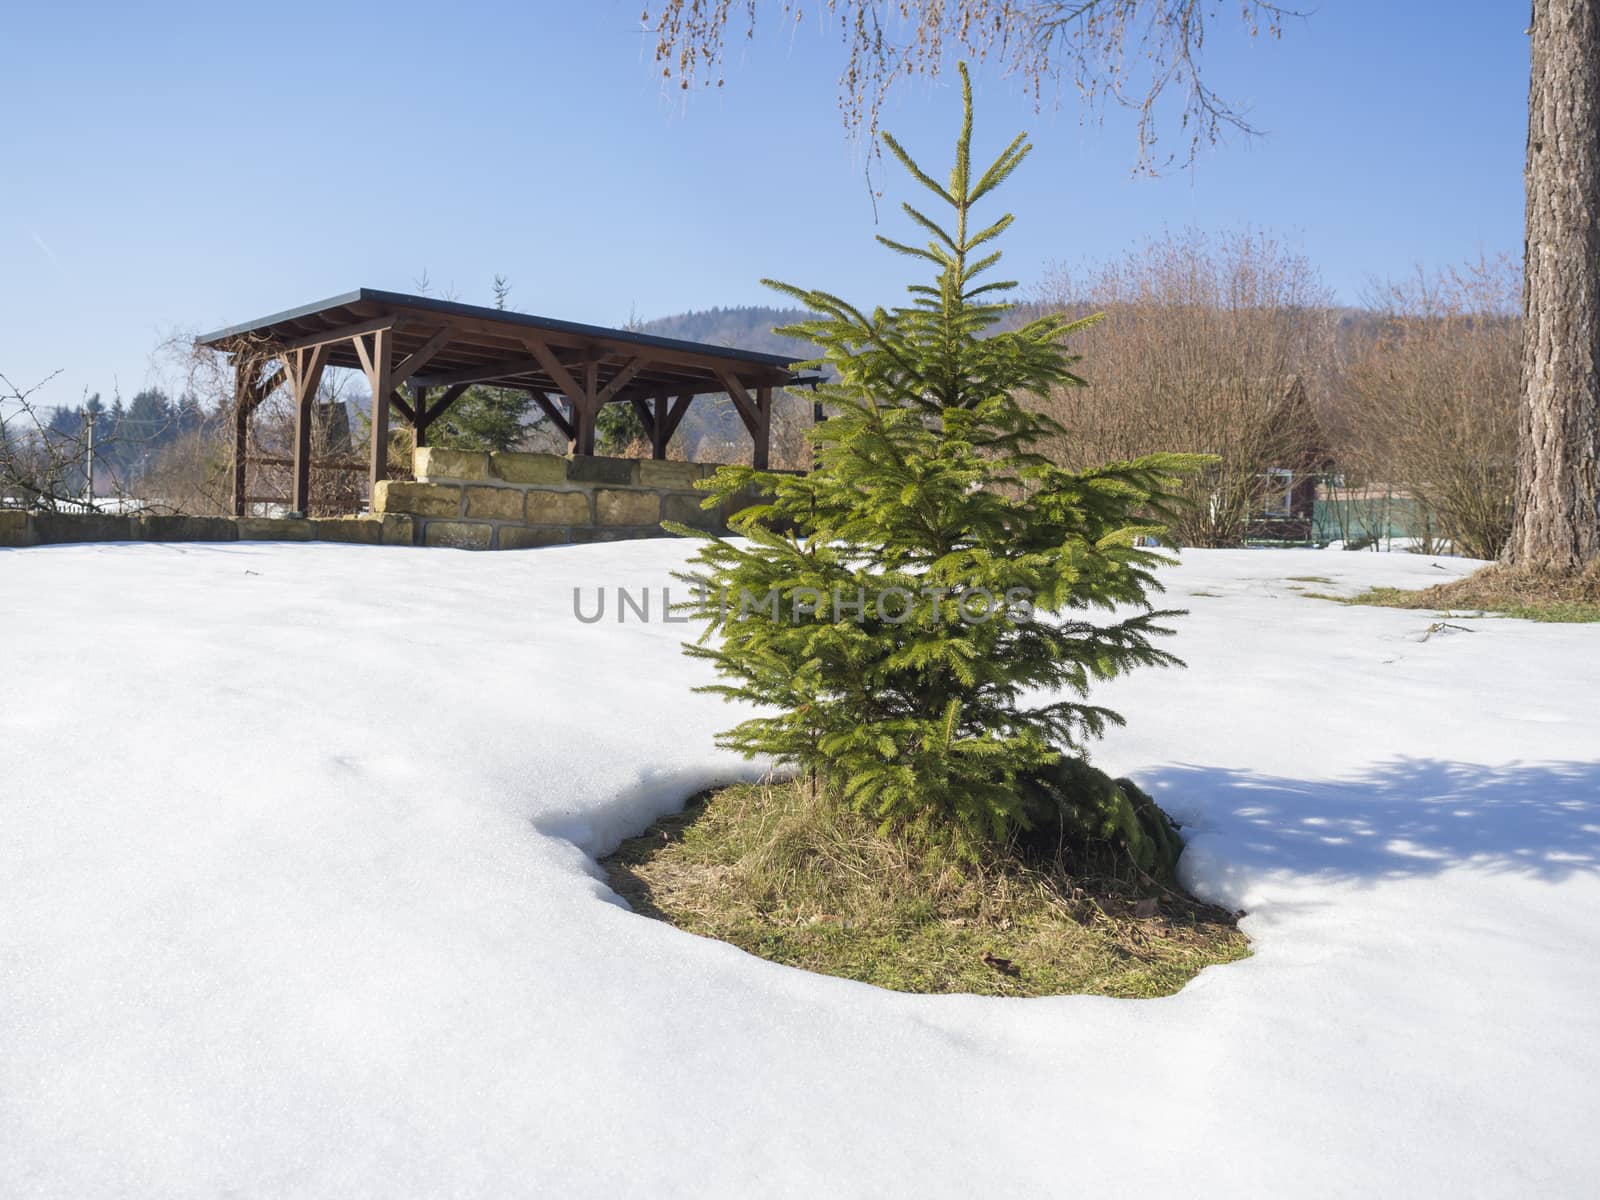 small vivid green young spruce tree in the white snow in winter sunny day on garden with wooden gazebo alcove or pergola in background. Winter landscape.